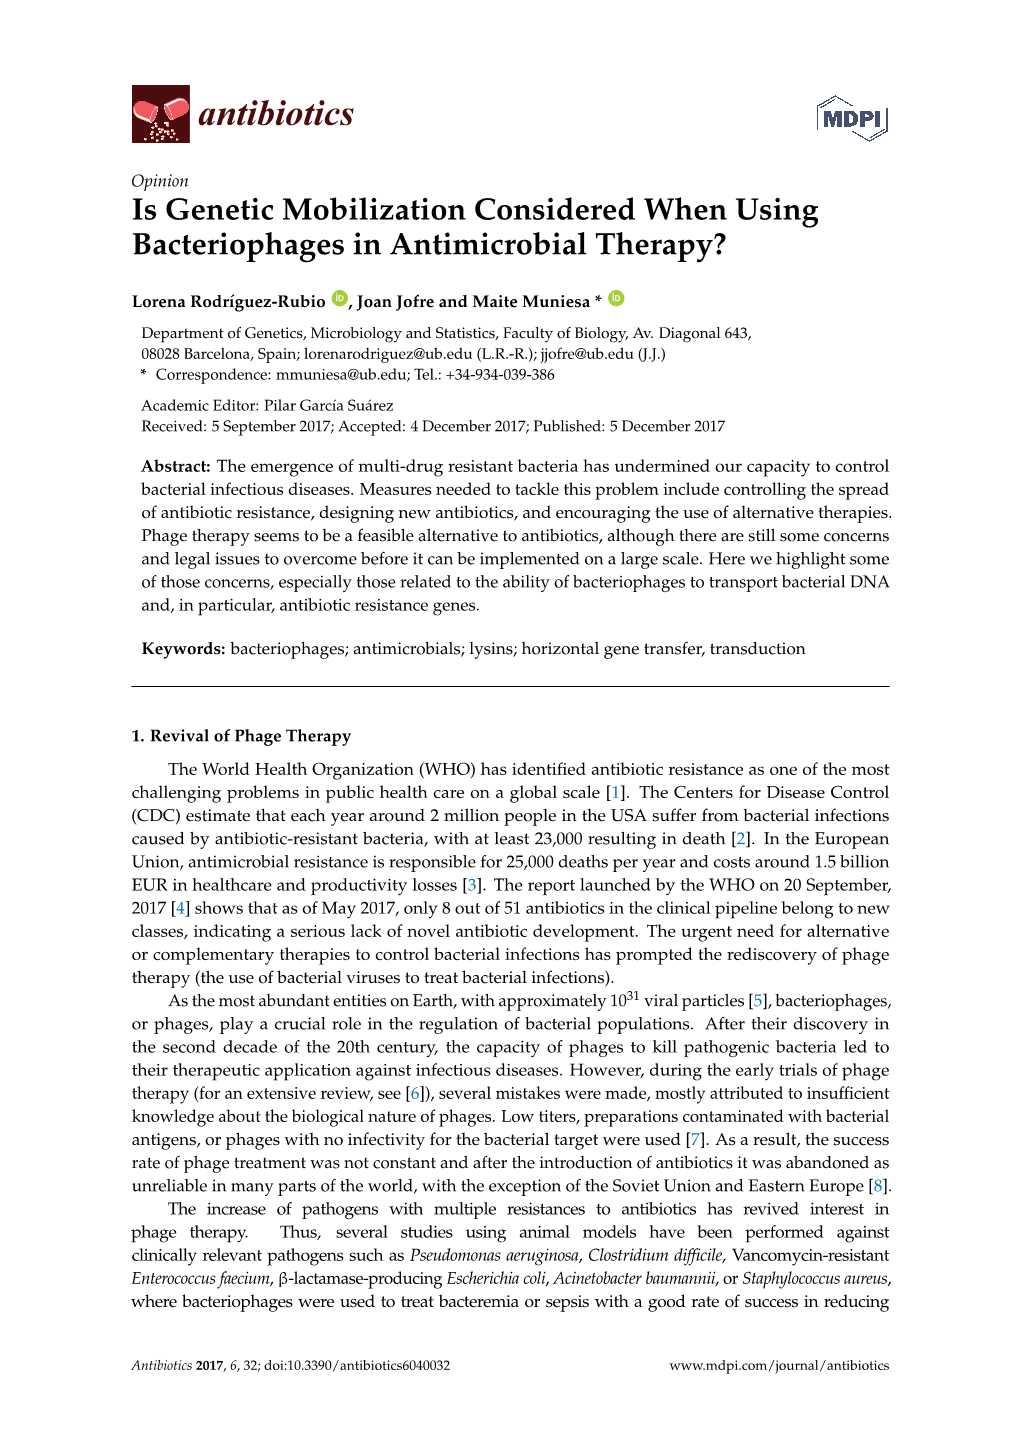 Is Genetic Mobilization Considered When Using Bacteriophages in Antimicrobial Therapy?